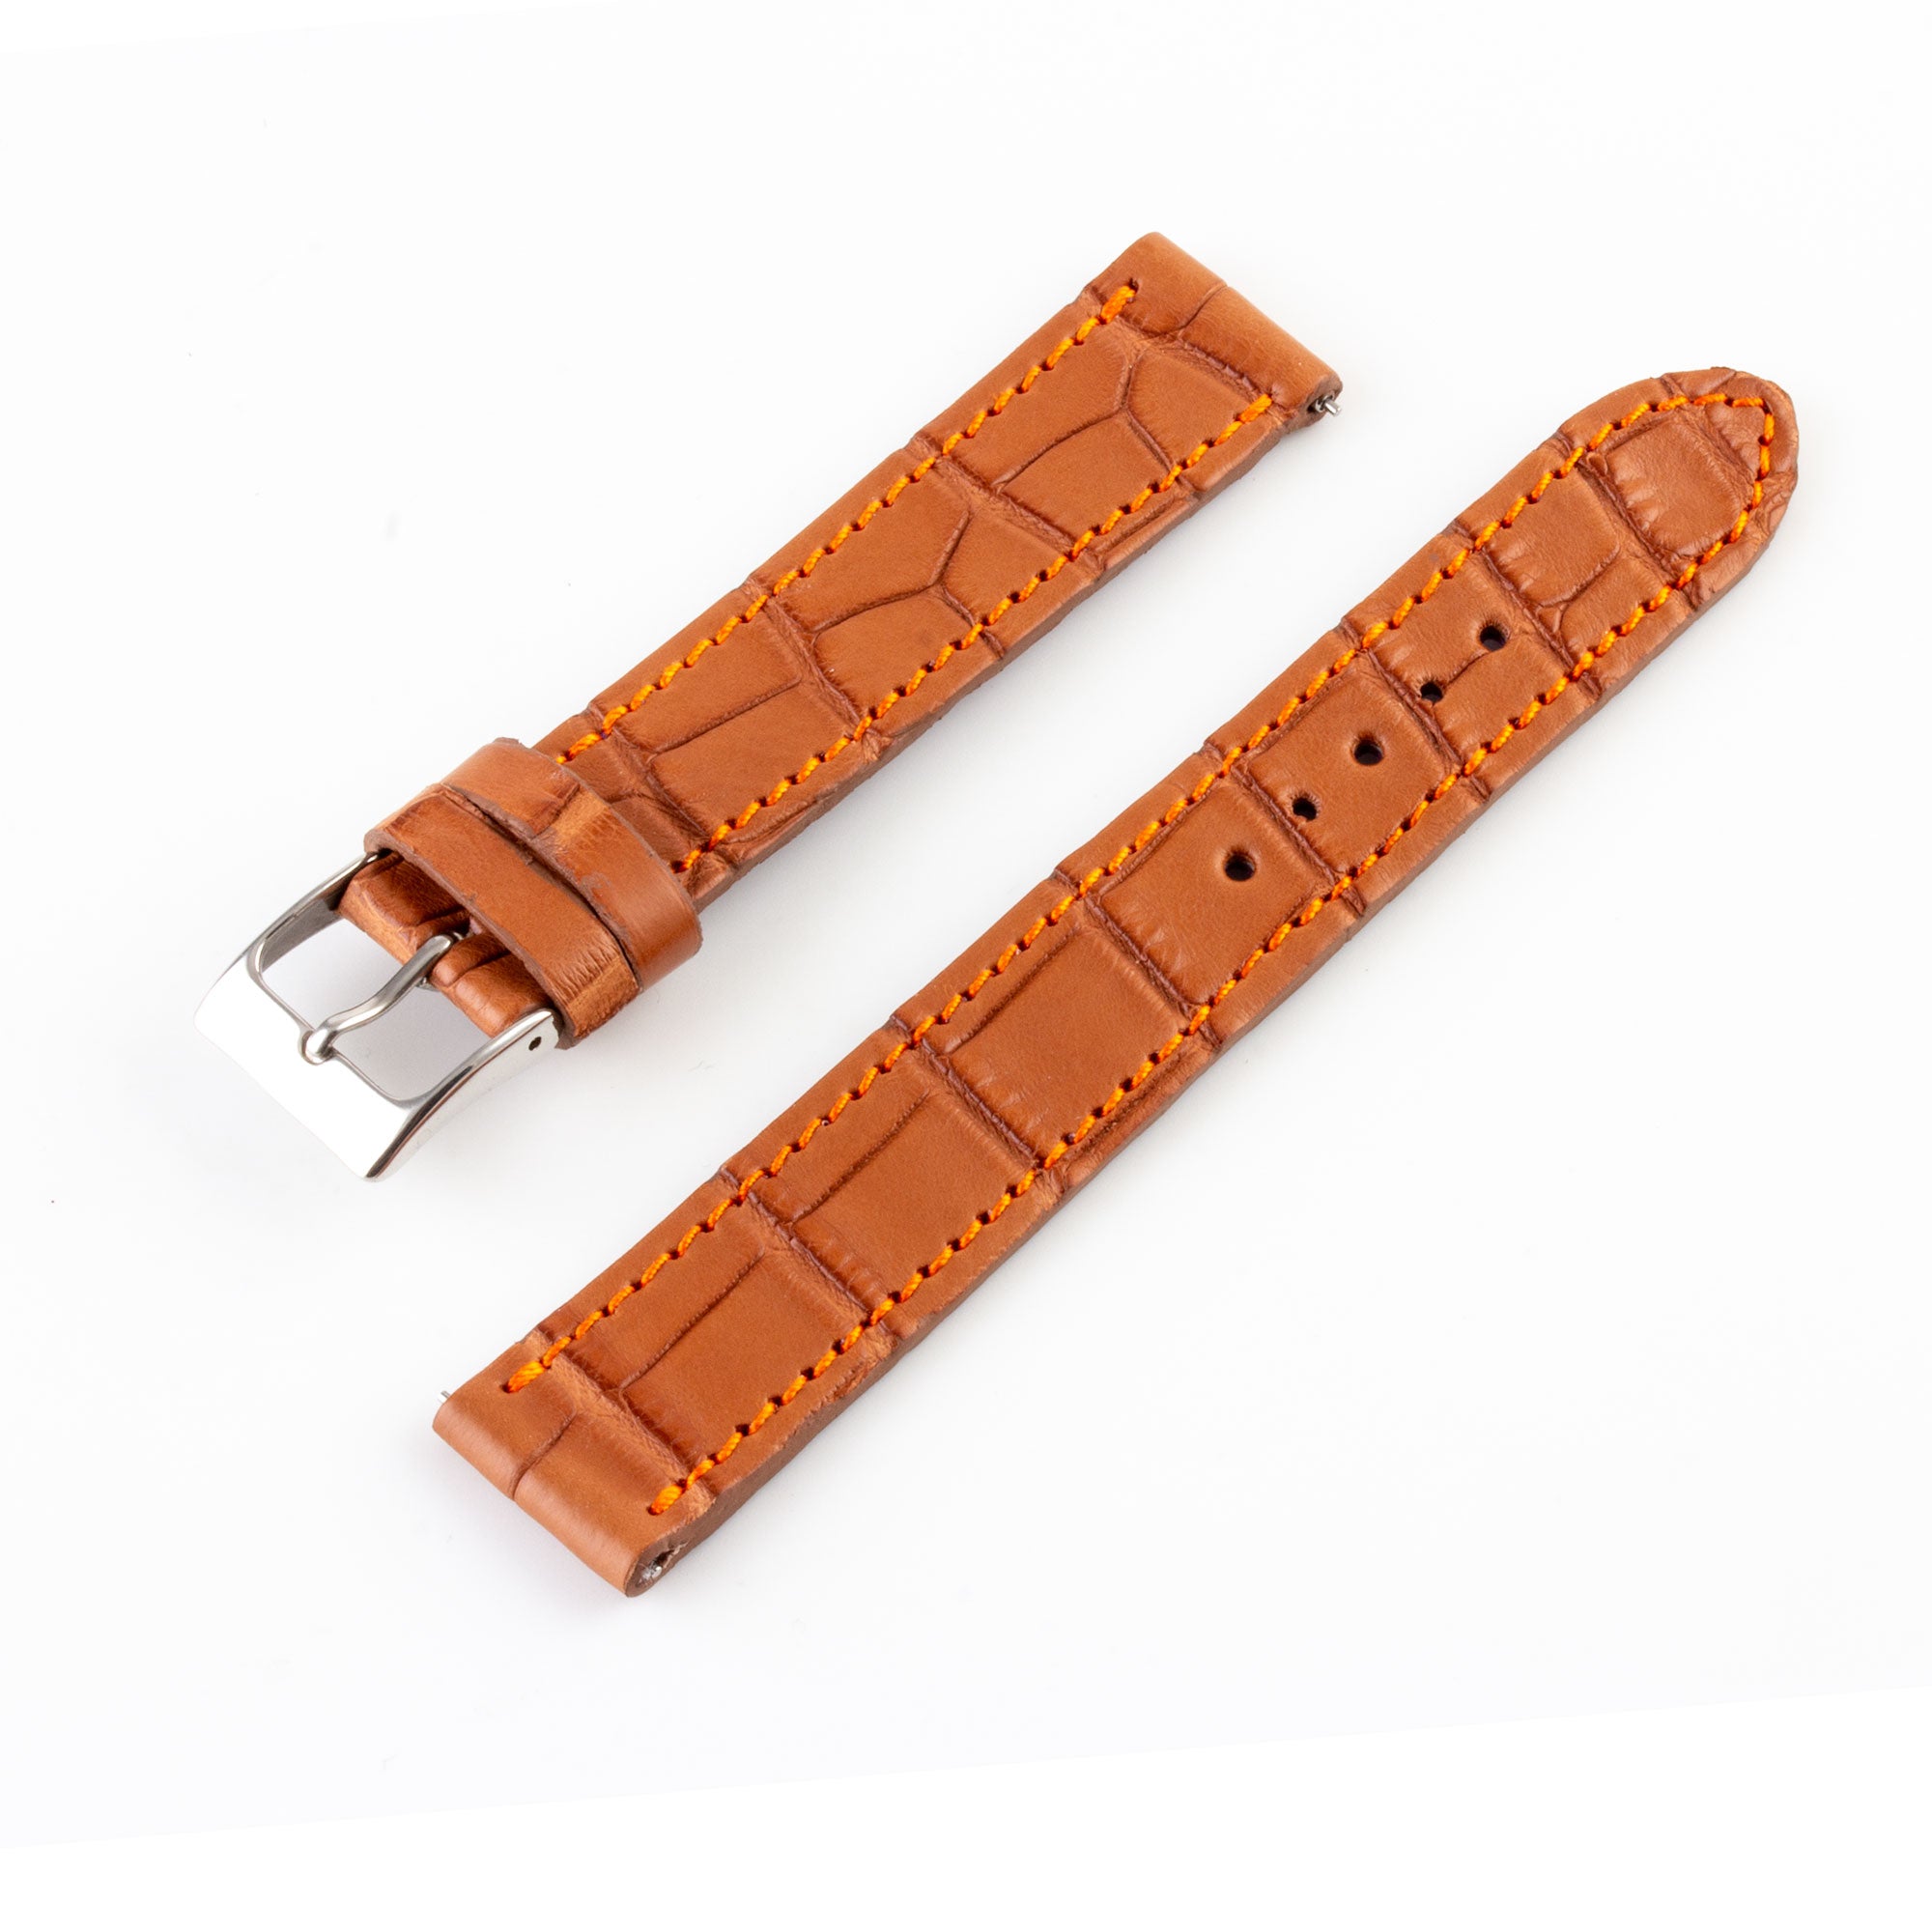 Alligator "Solo" leather watch band - 17mm width (0.67 inches) / Size M (n° 2)